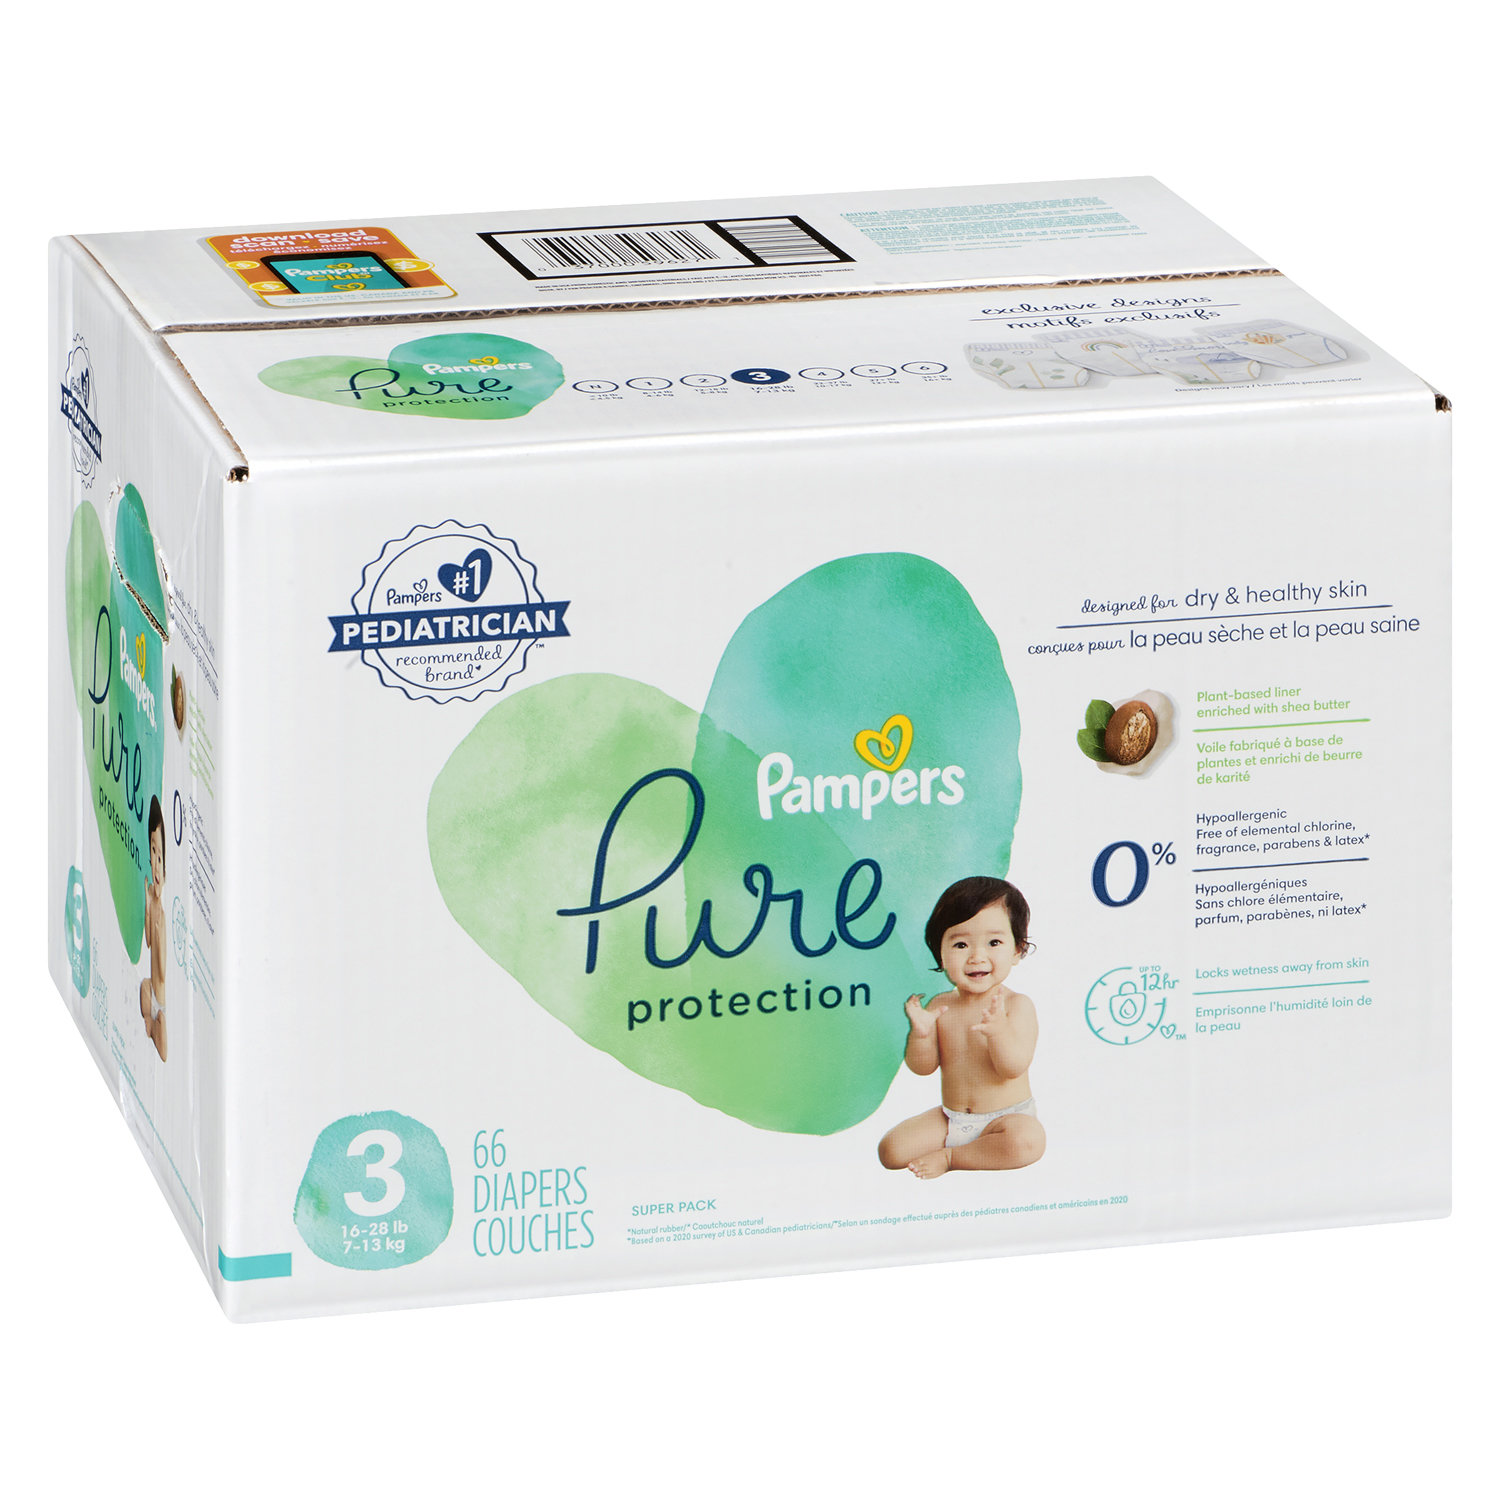 Pampers Pure Diapers Size 4, 108 Count (Select for More Options) 